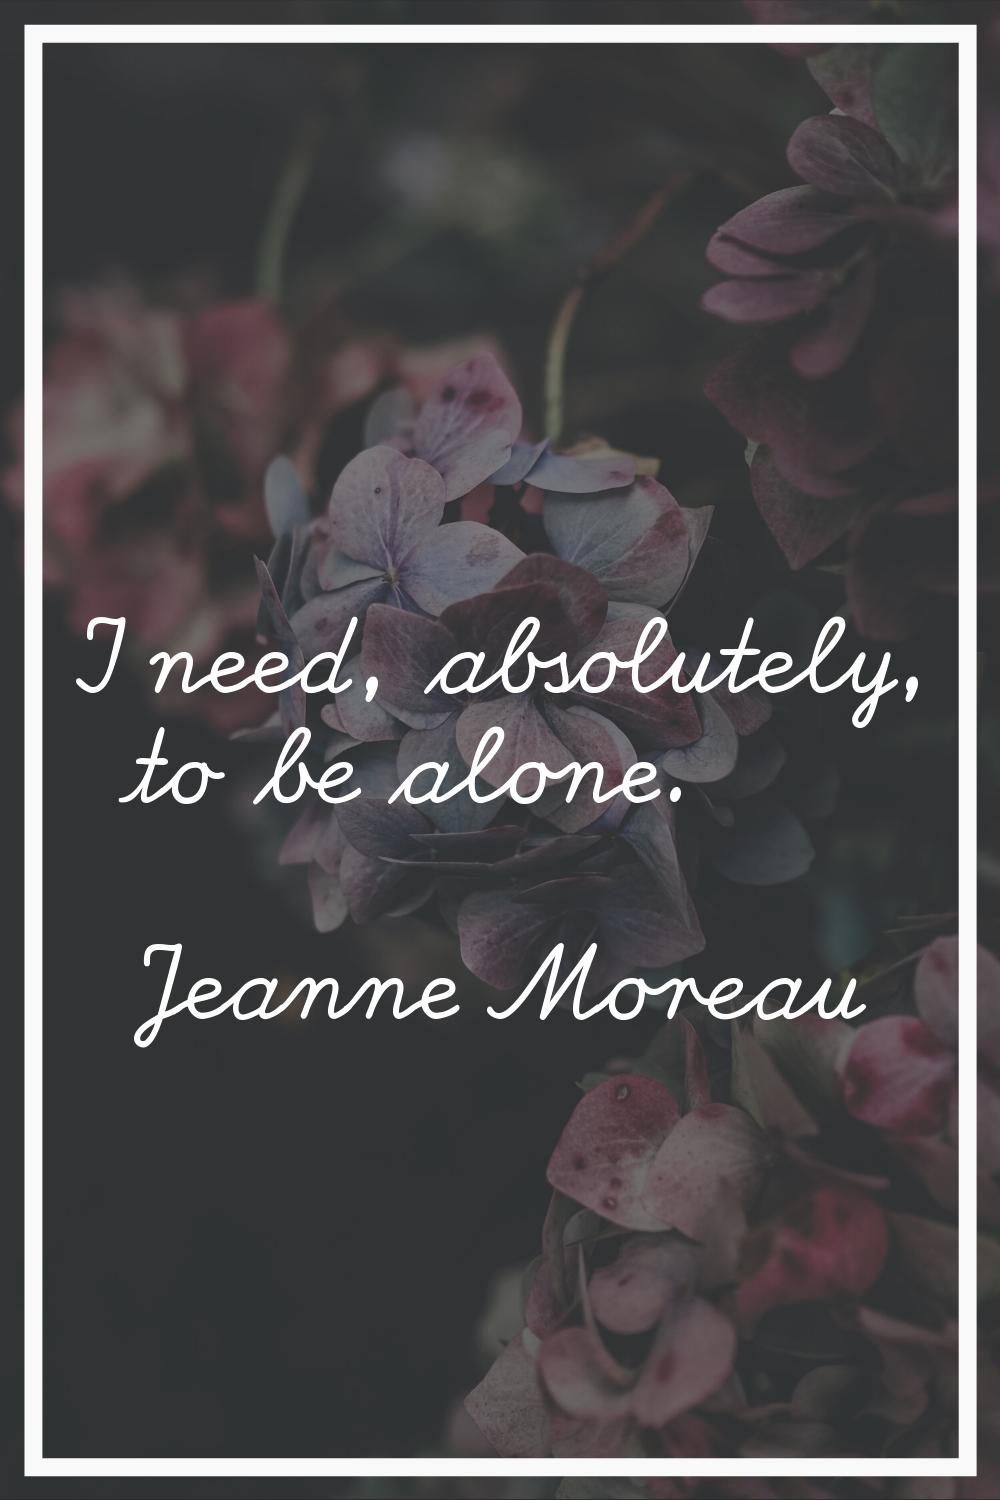 I need, absolutely, to be alone.